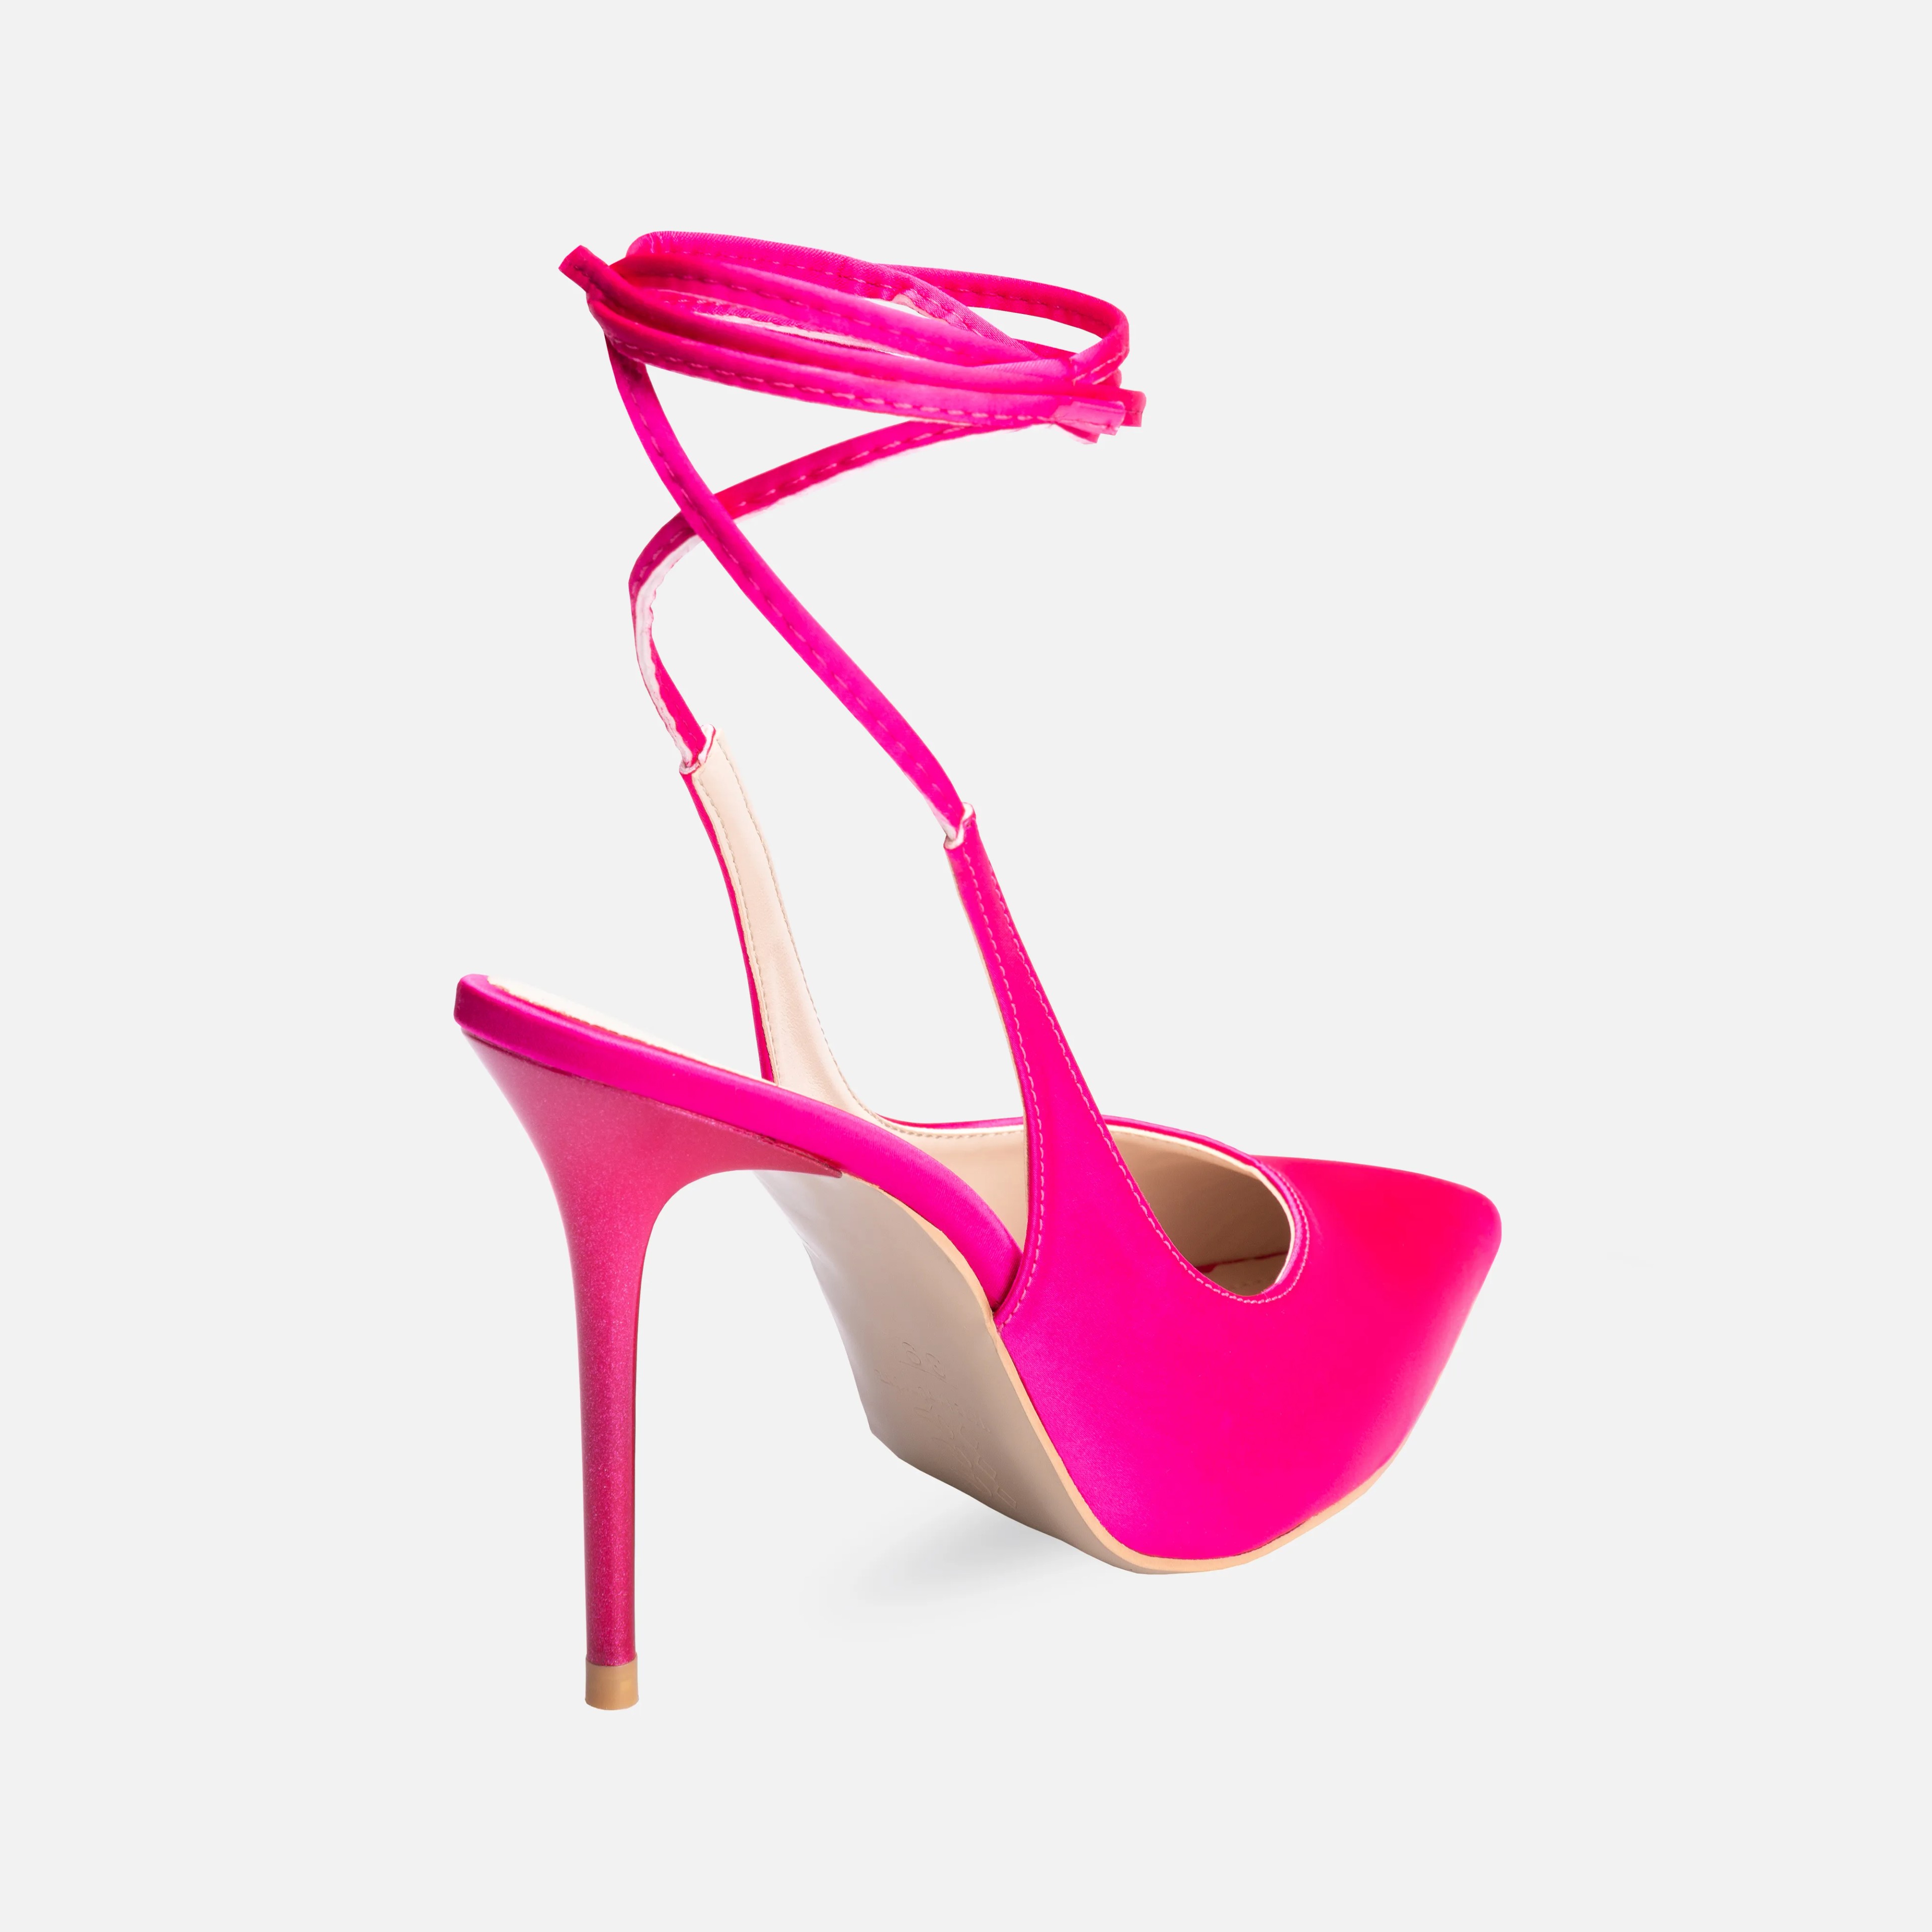 Satin Lace-up Thin High-Heeled Pumps - Fuchsia Color